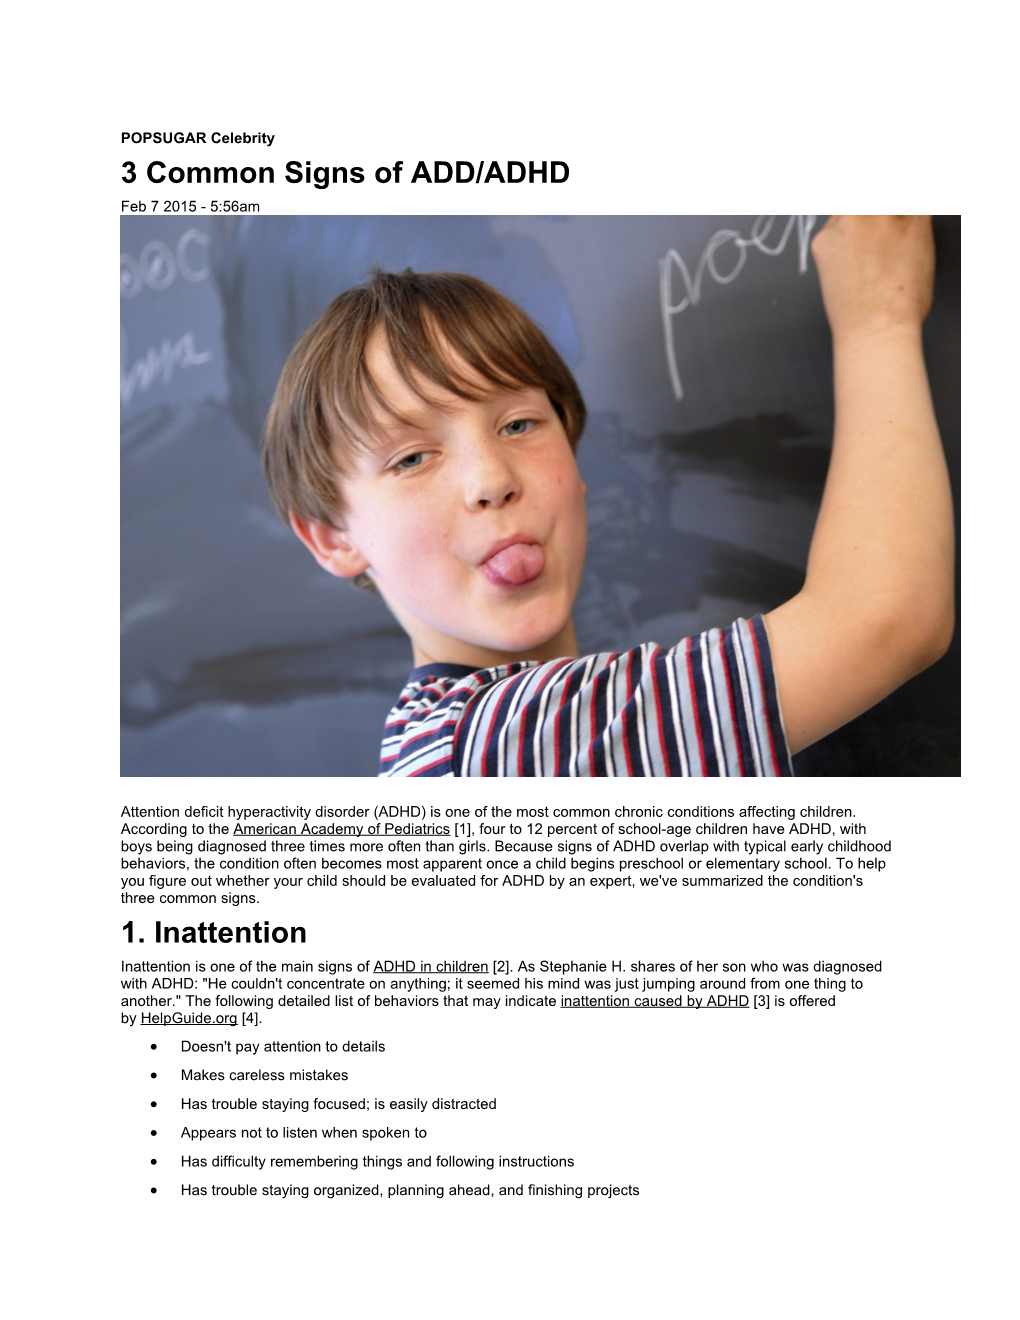 3 Common Signs of ADD/ADHD